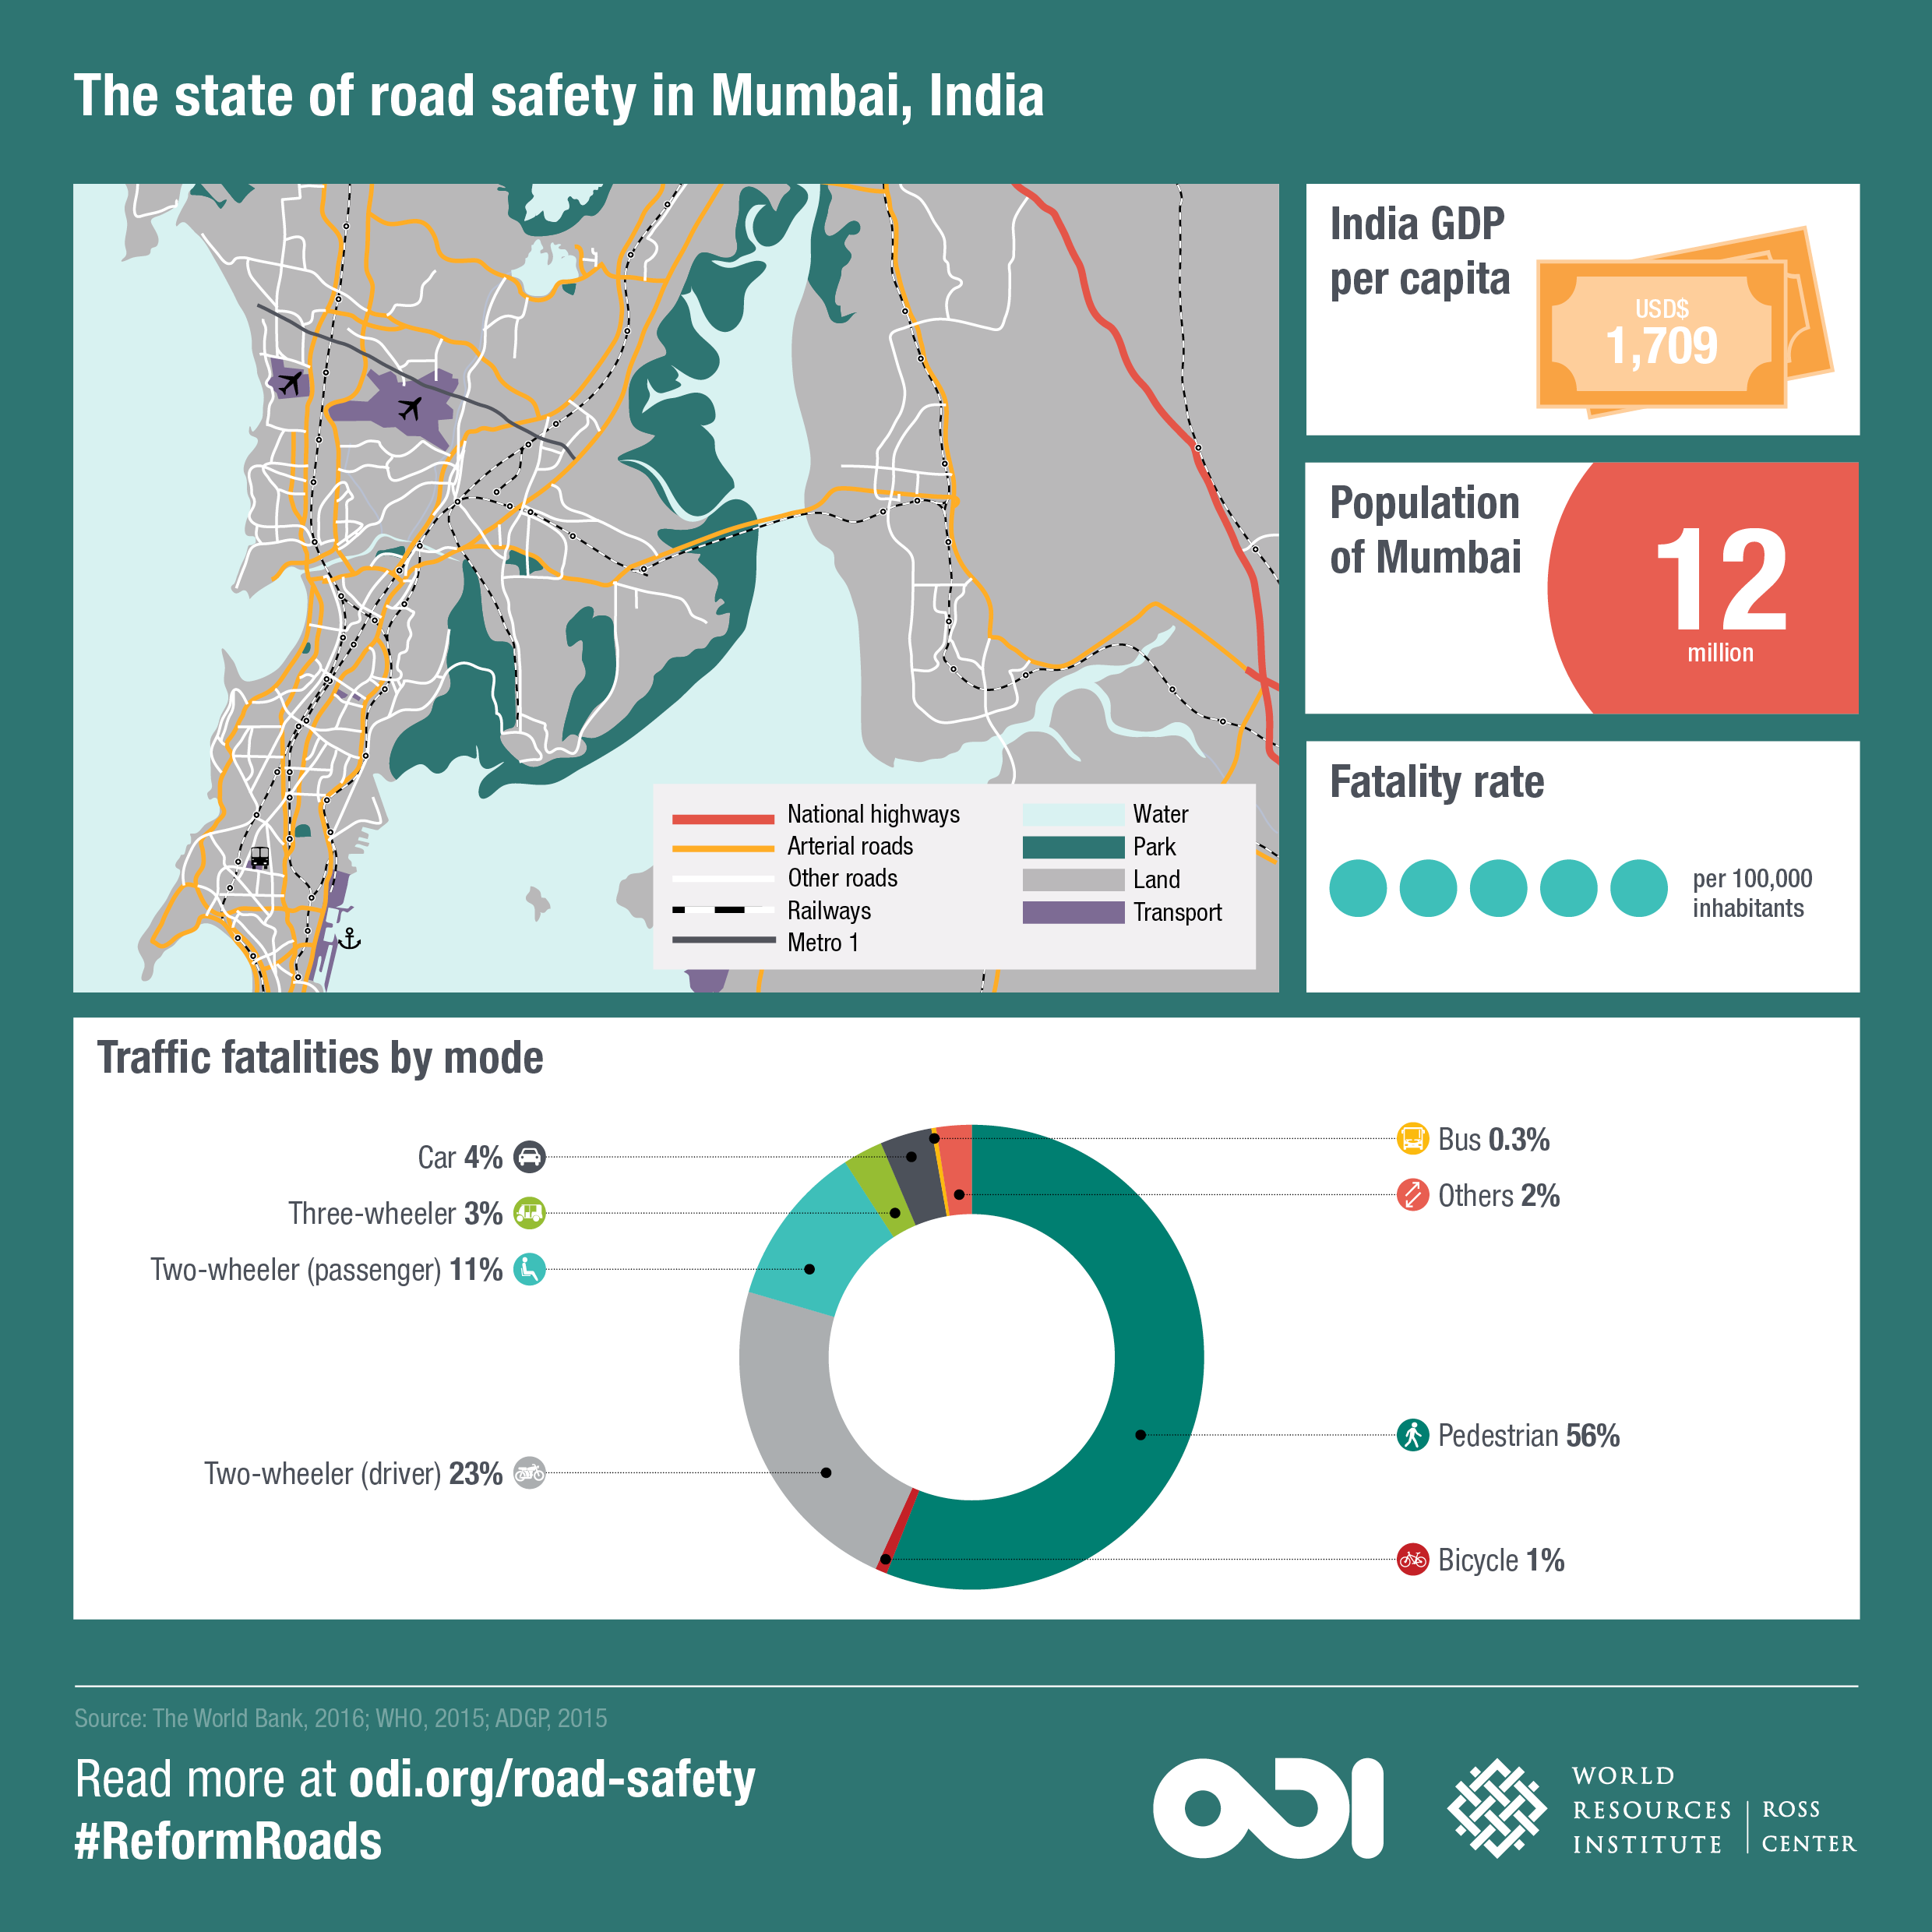 The state of road safety in Mumbai. Image: ODI and WRI